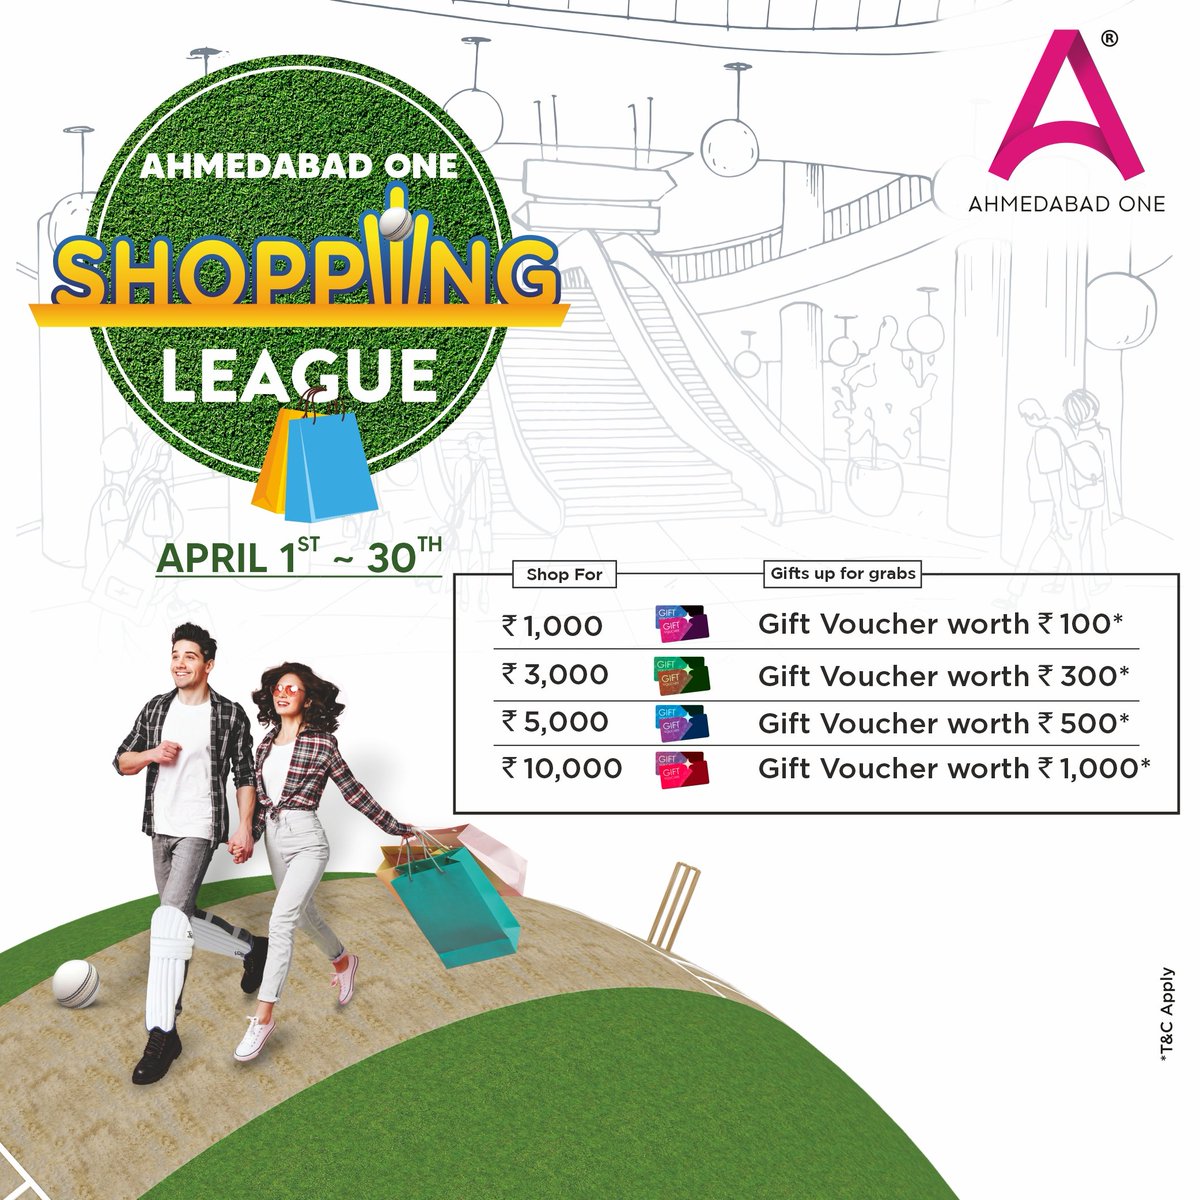 Make a clean sweep of rewards this season every time you shop at #AhmedabadOneSHOPPINGLEAGUE with #AhmedabadOne When are you visiting us?? #indianmalls #nexusmalls #shop #win #rewards #mallsinahmedabad #ahmedabad